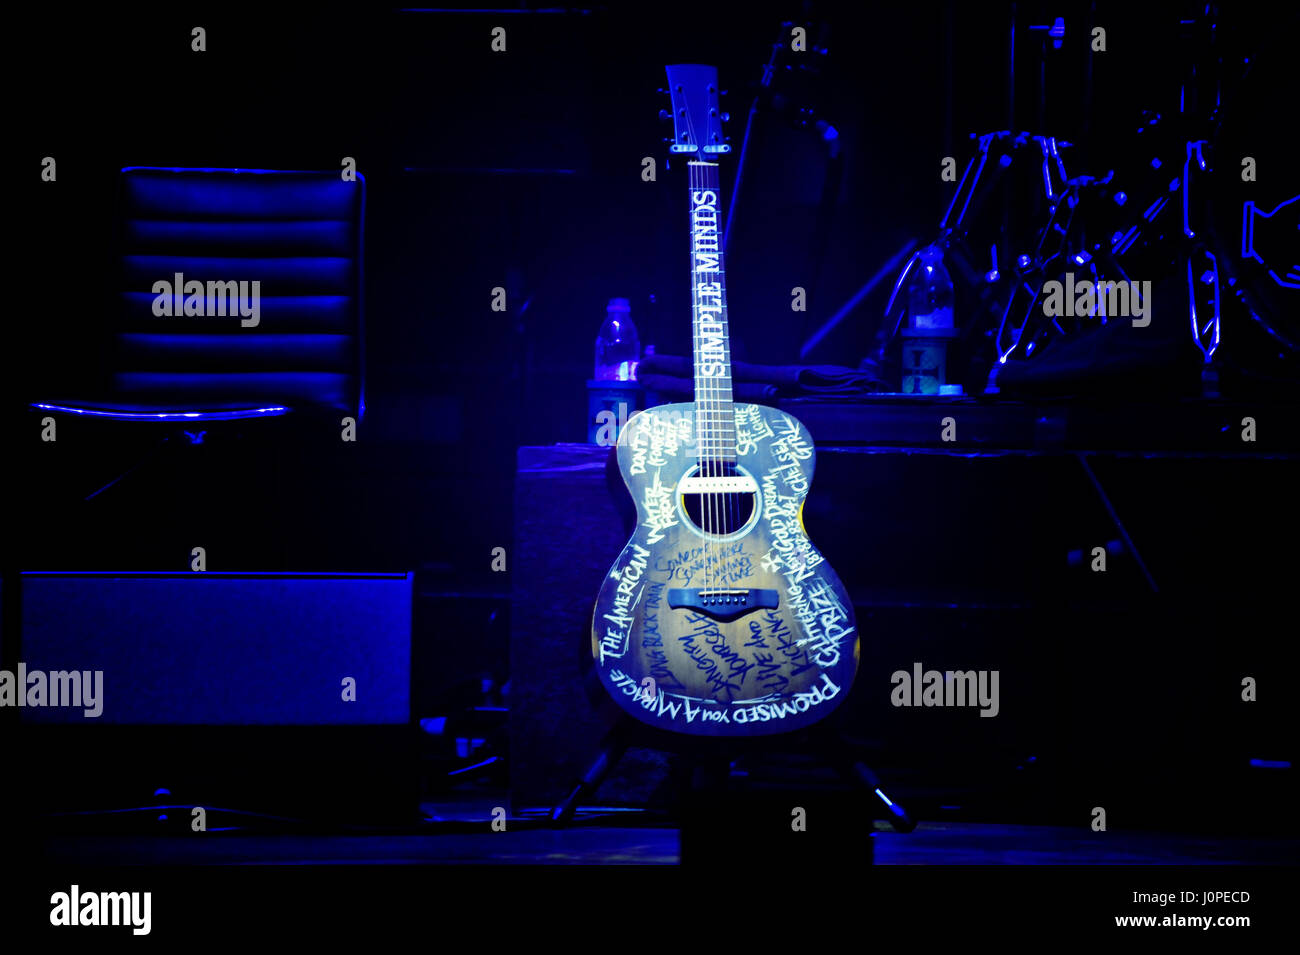 Simple Minds Live in Concert, Amburgo, Germania Foto Stock